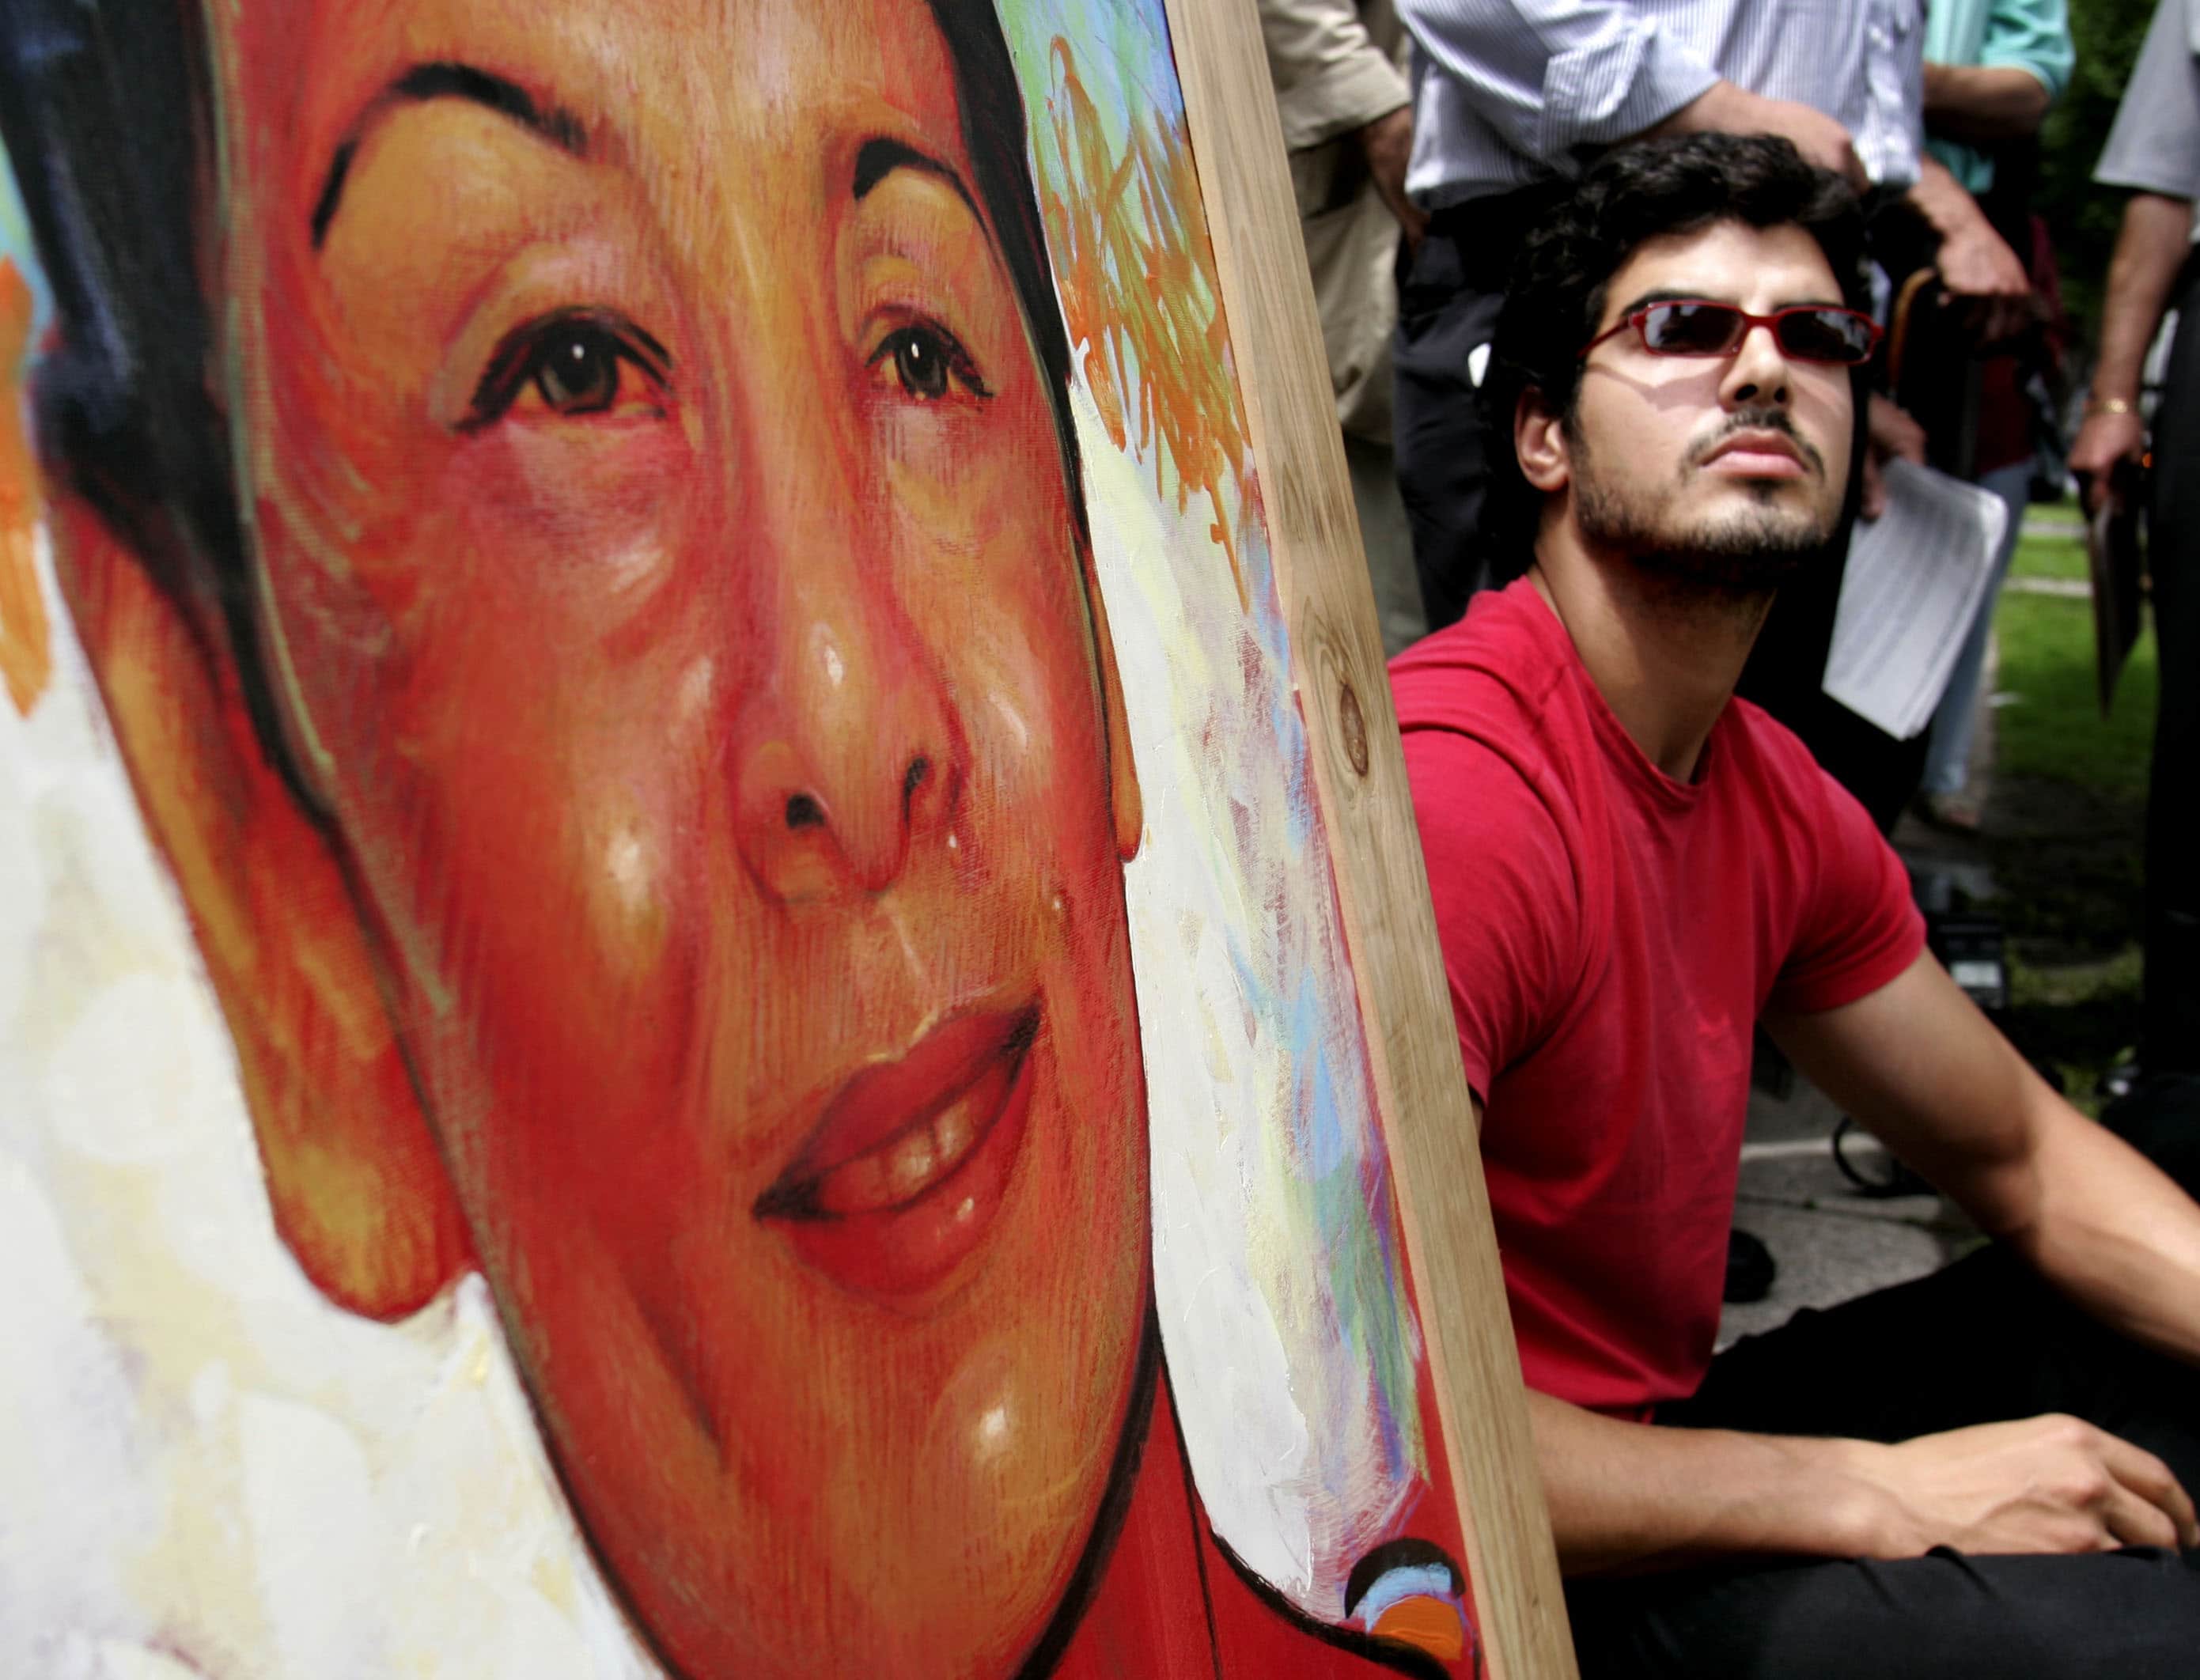 Stephan Hachemi, son of Zahra Kazemi, sits beside a portrait of his mother during a protest outside the Iranian Embassy in Ottawa in 2004, REUTERS/Jim Young JY/HB